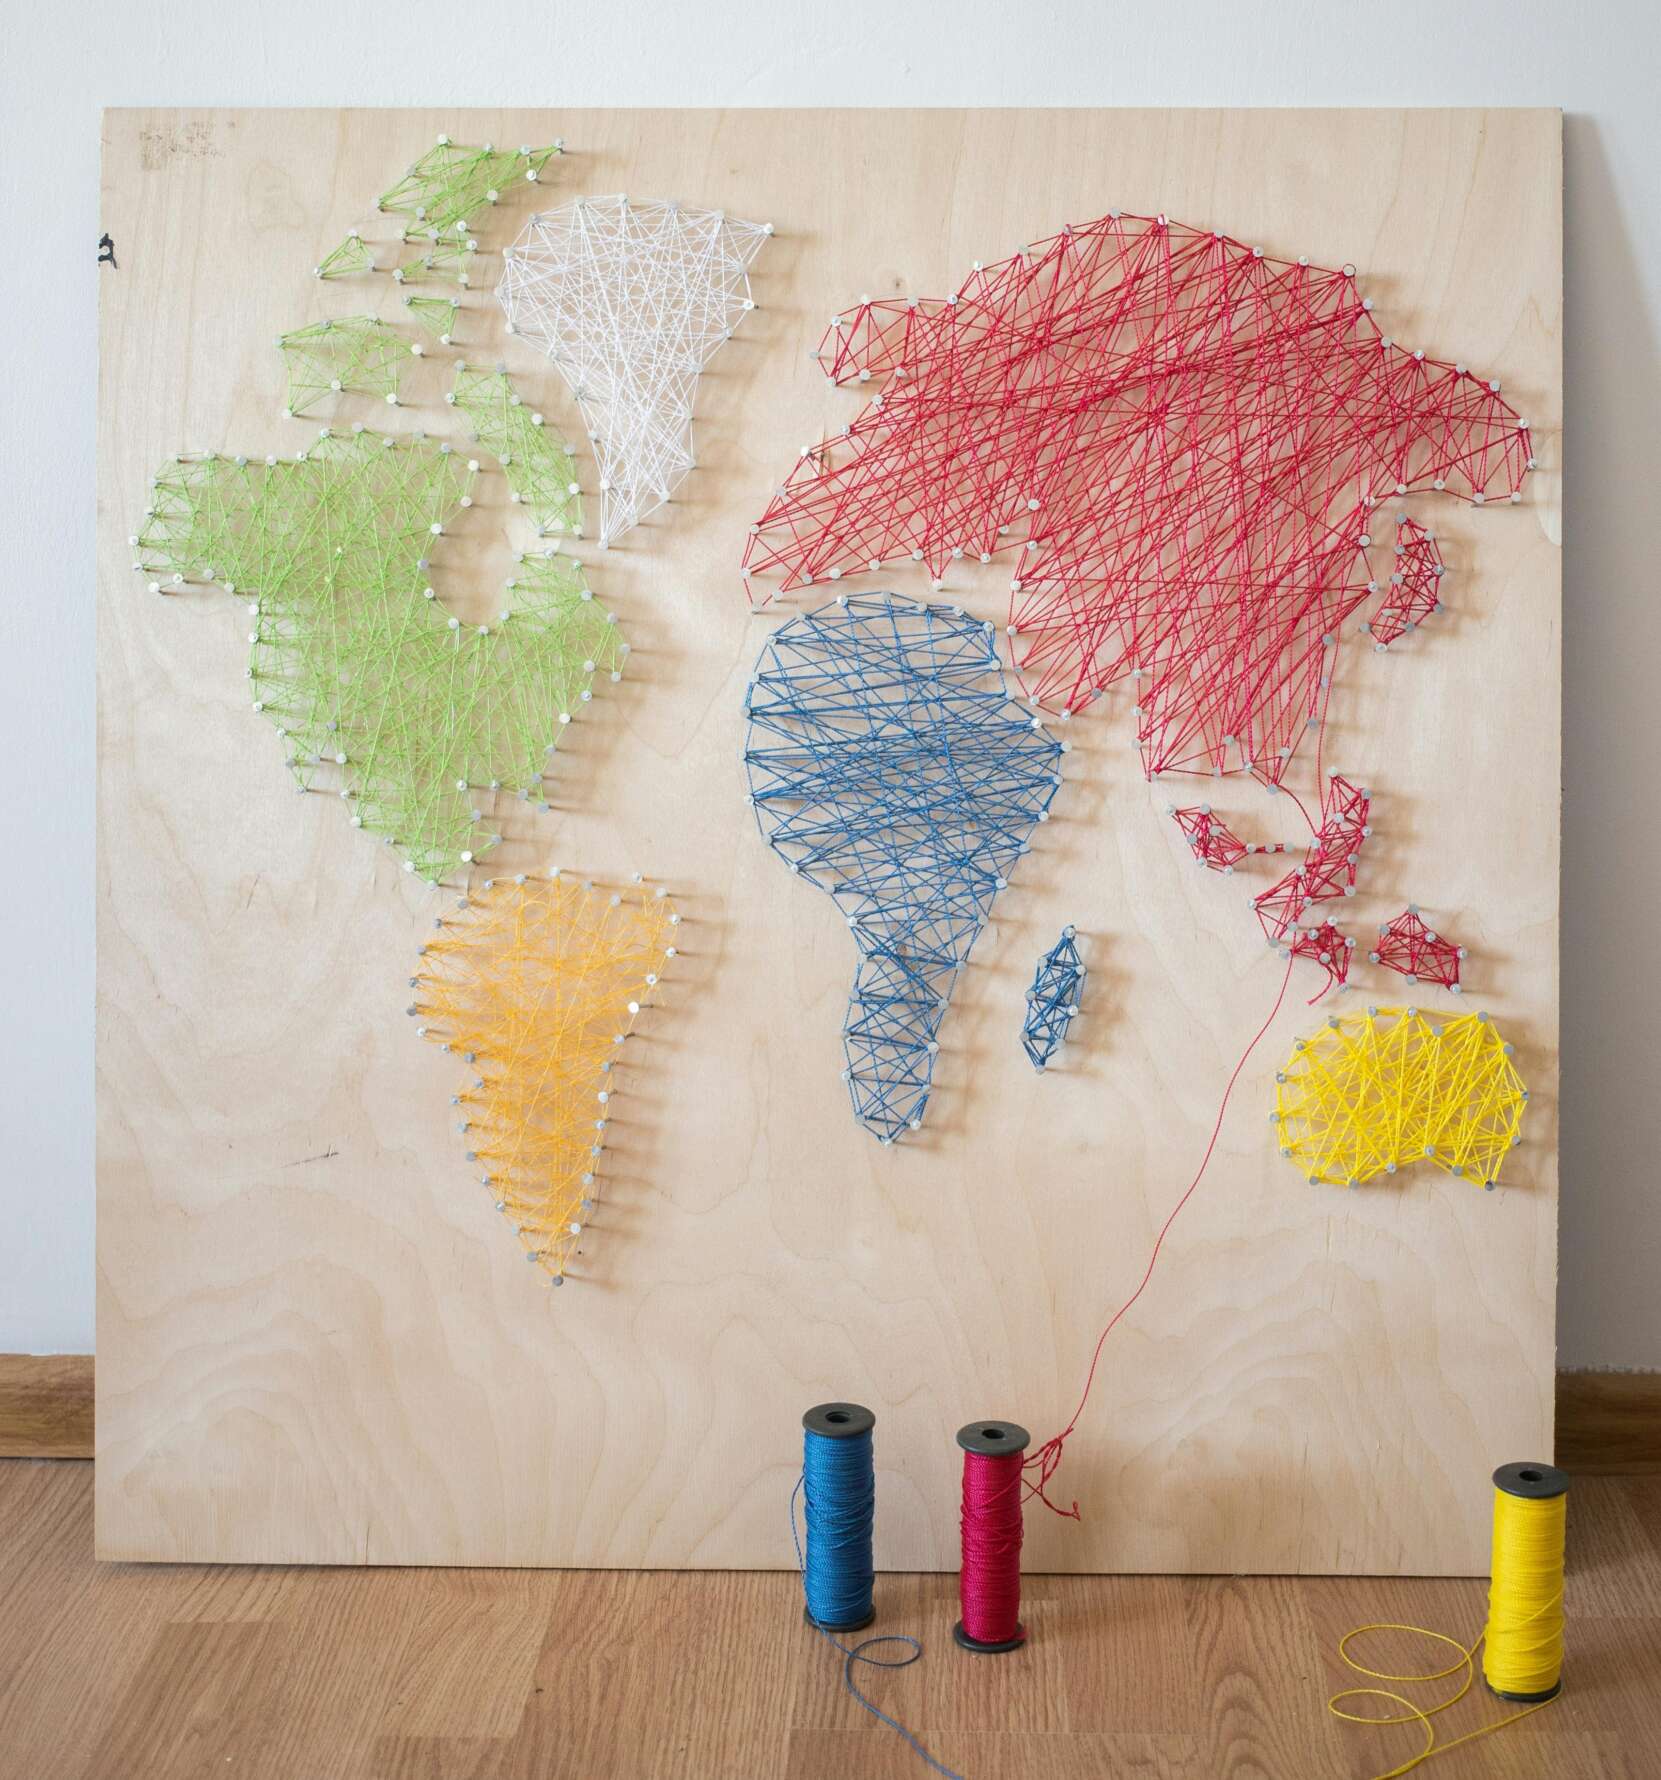 Photo of world map made of string art